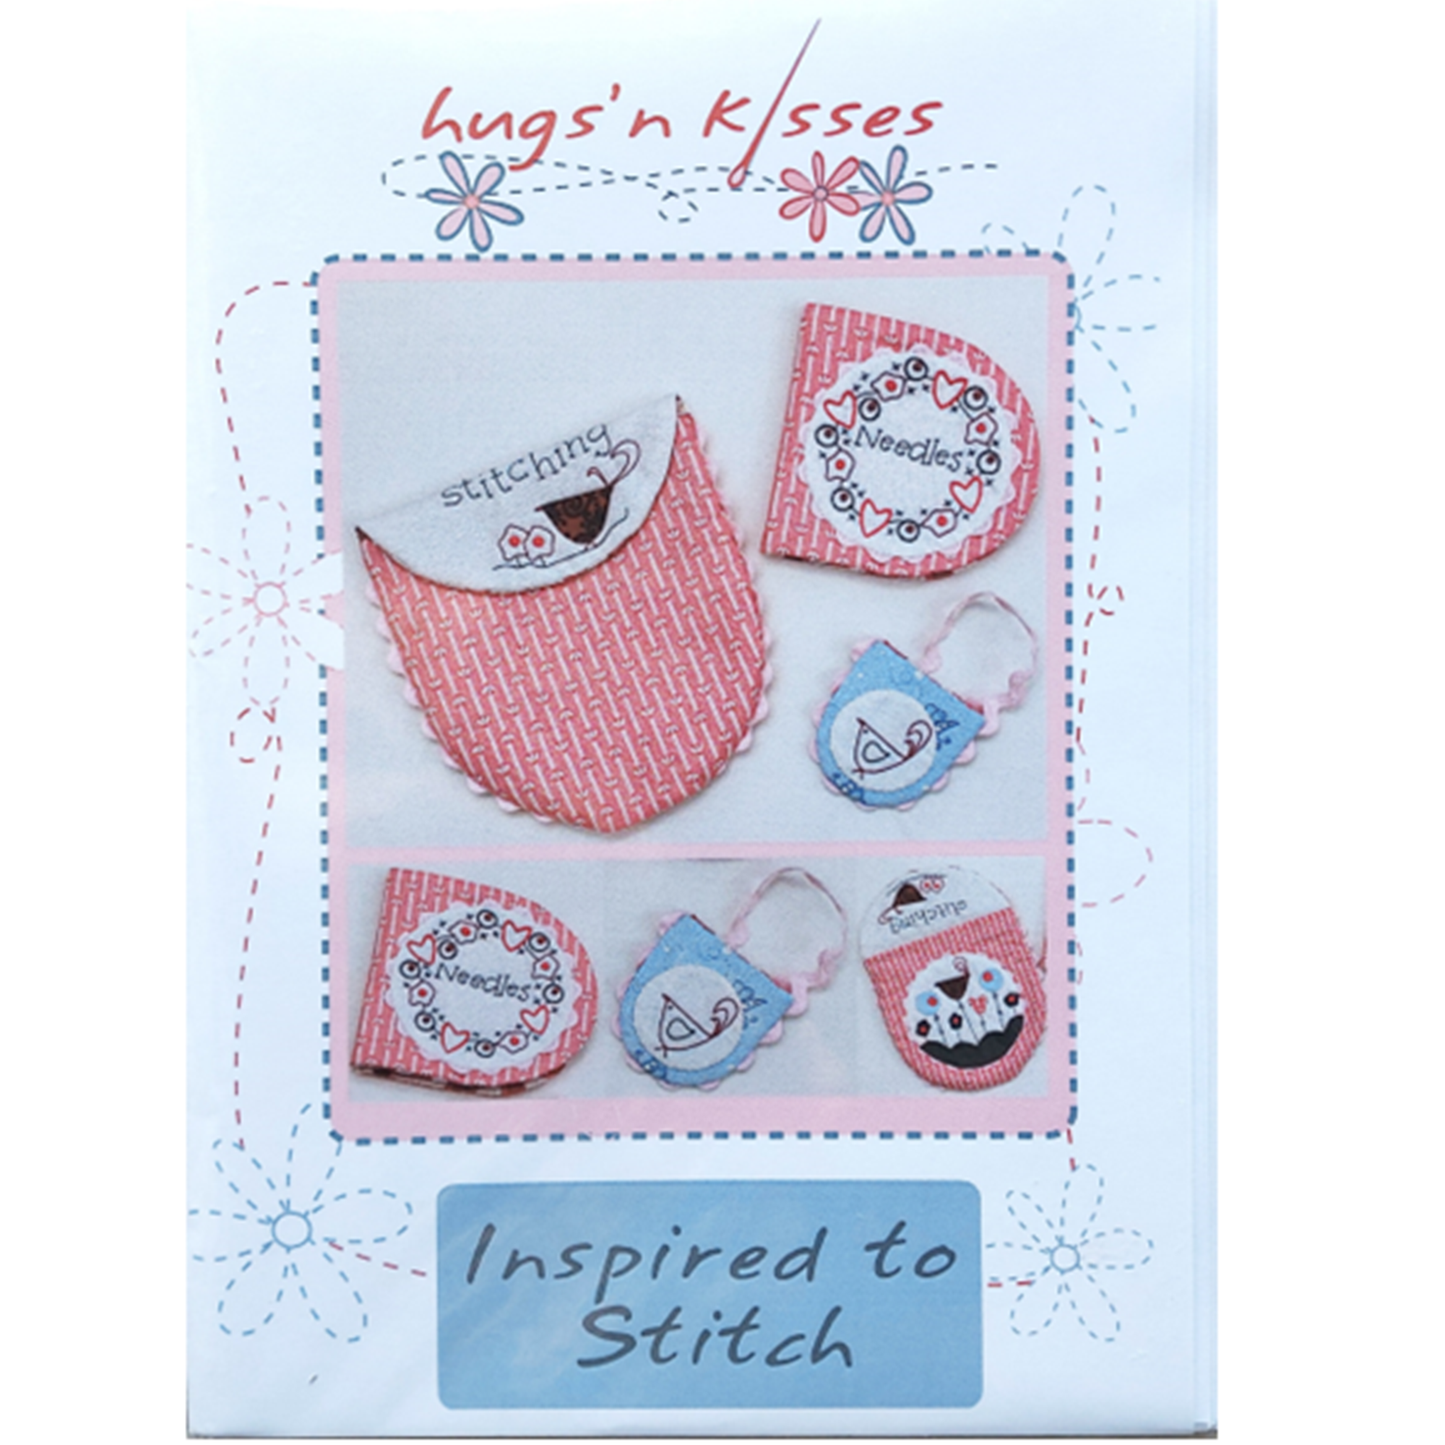 Inspired to Stitch Sewing Kit applique embroidery Hugs 'N Kisses pattern